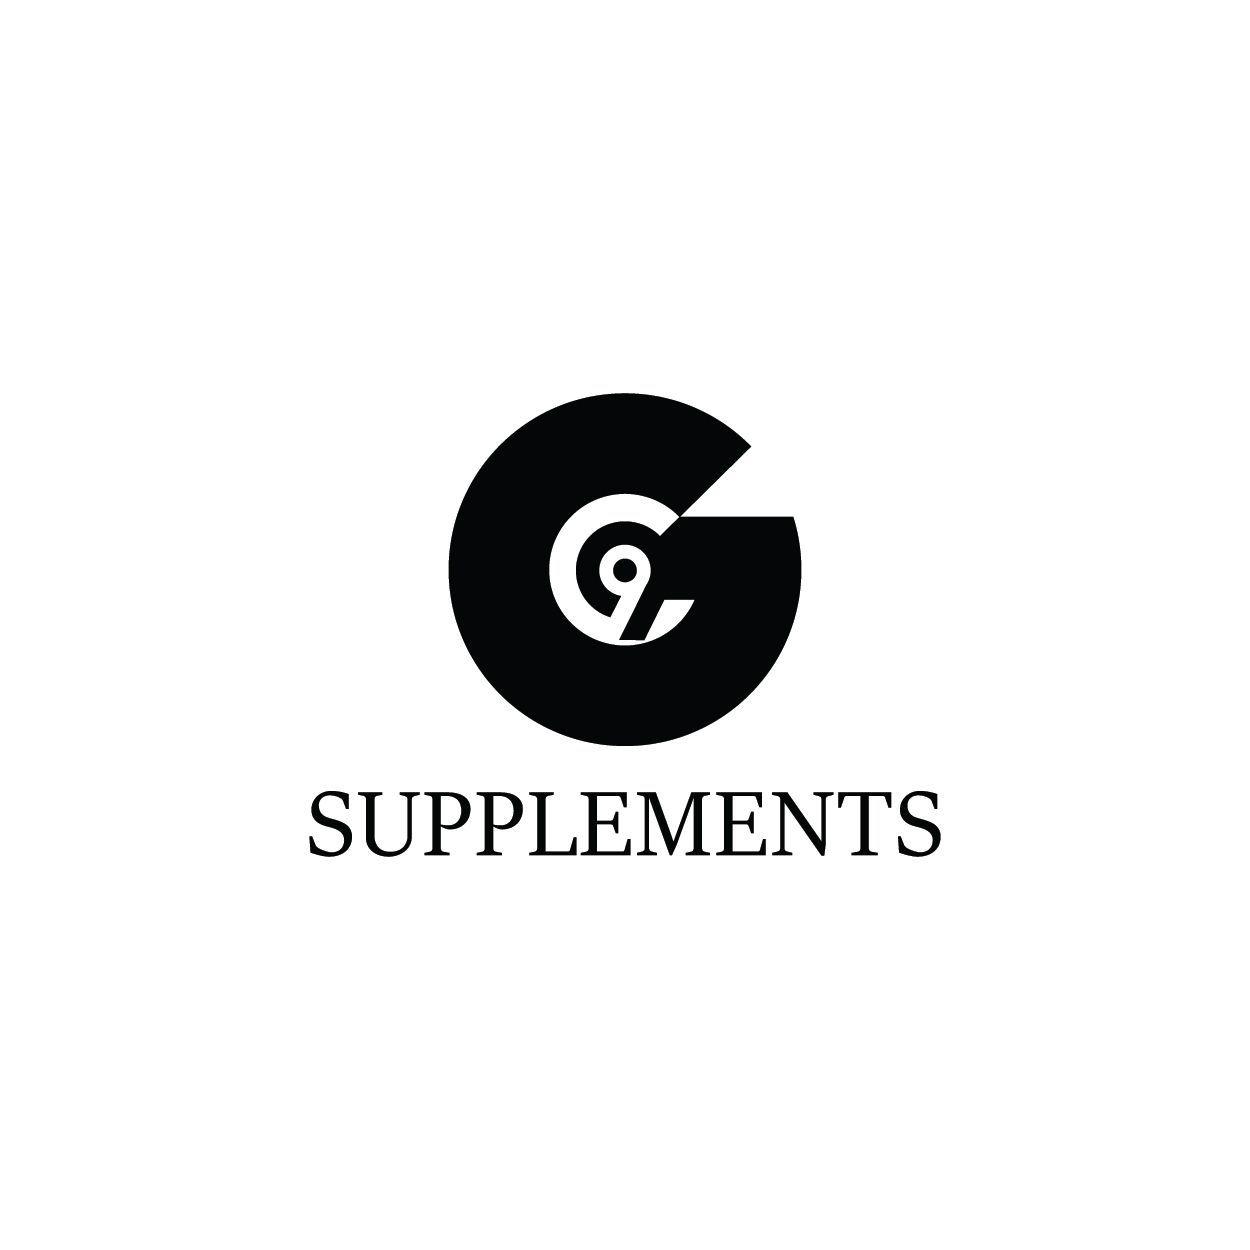 Supplement Company Logo - G9 supplement company logo | Projects to try | Company logo ...